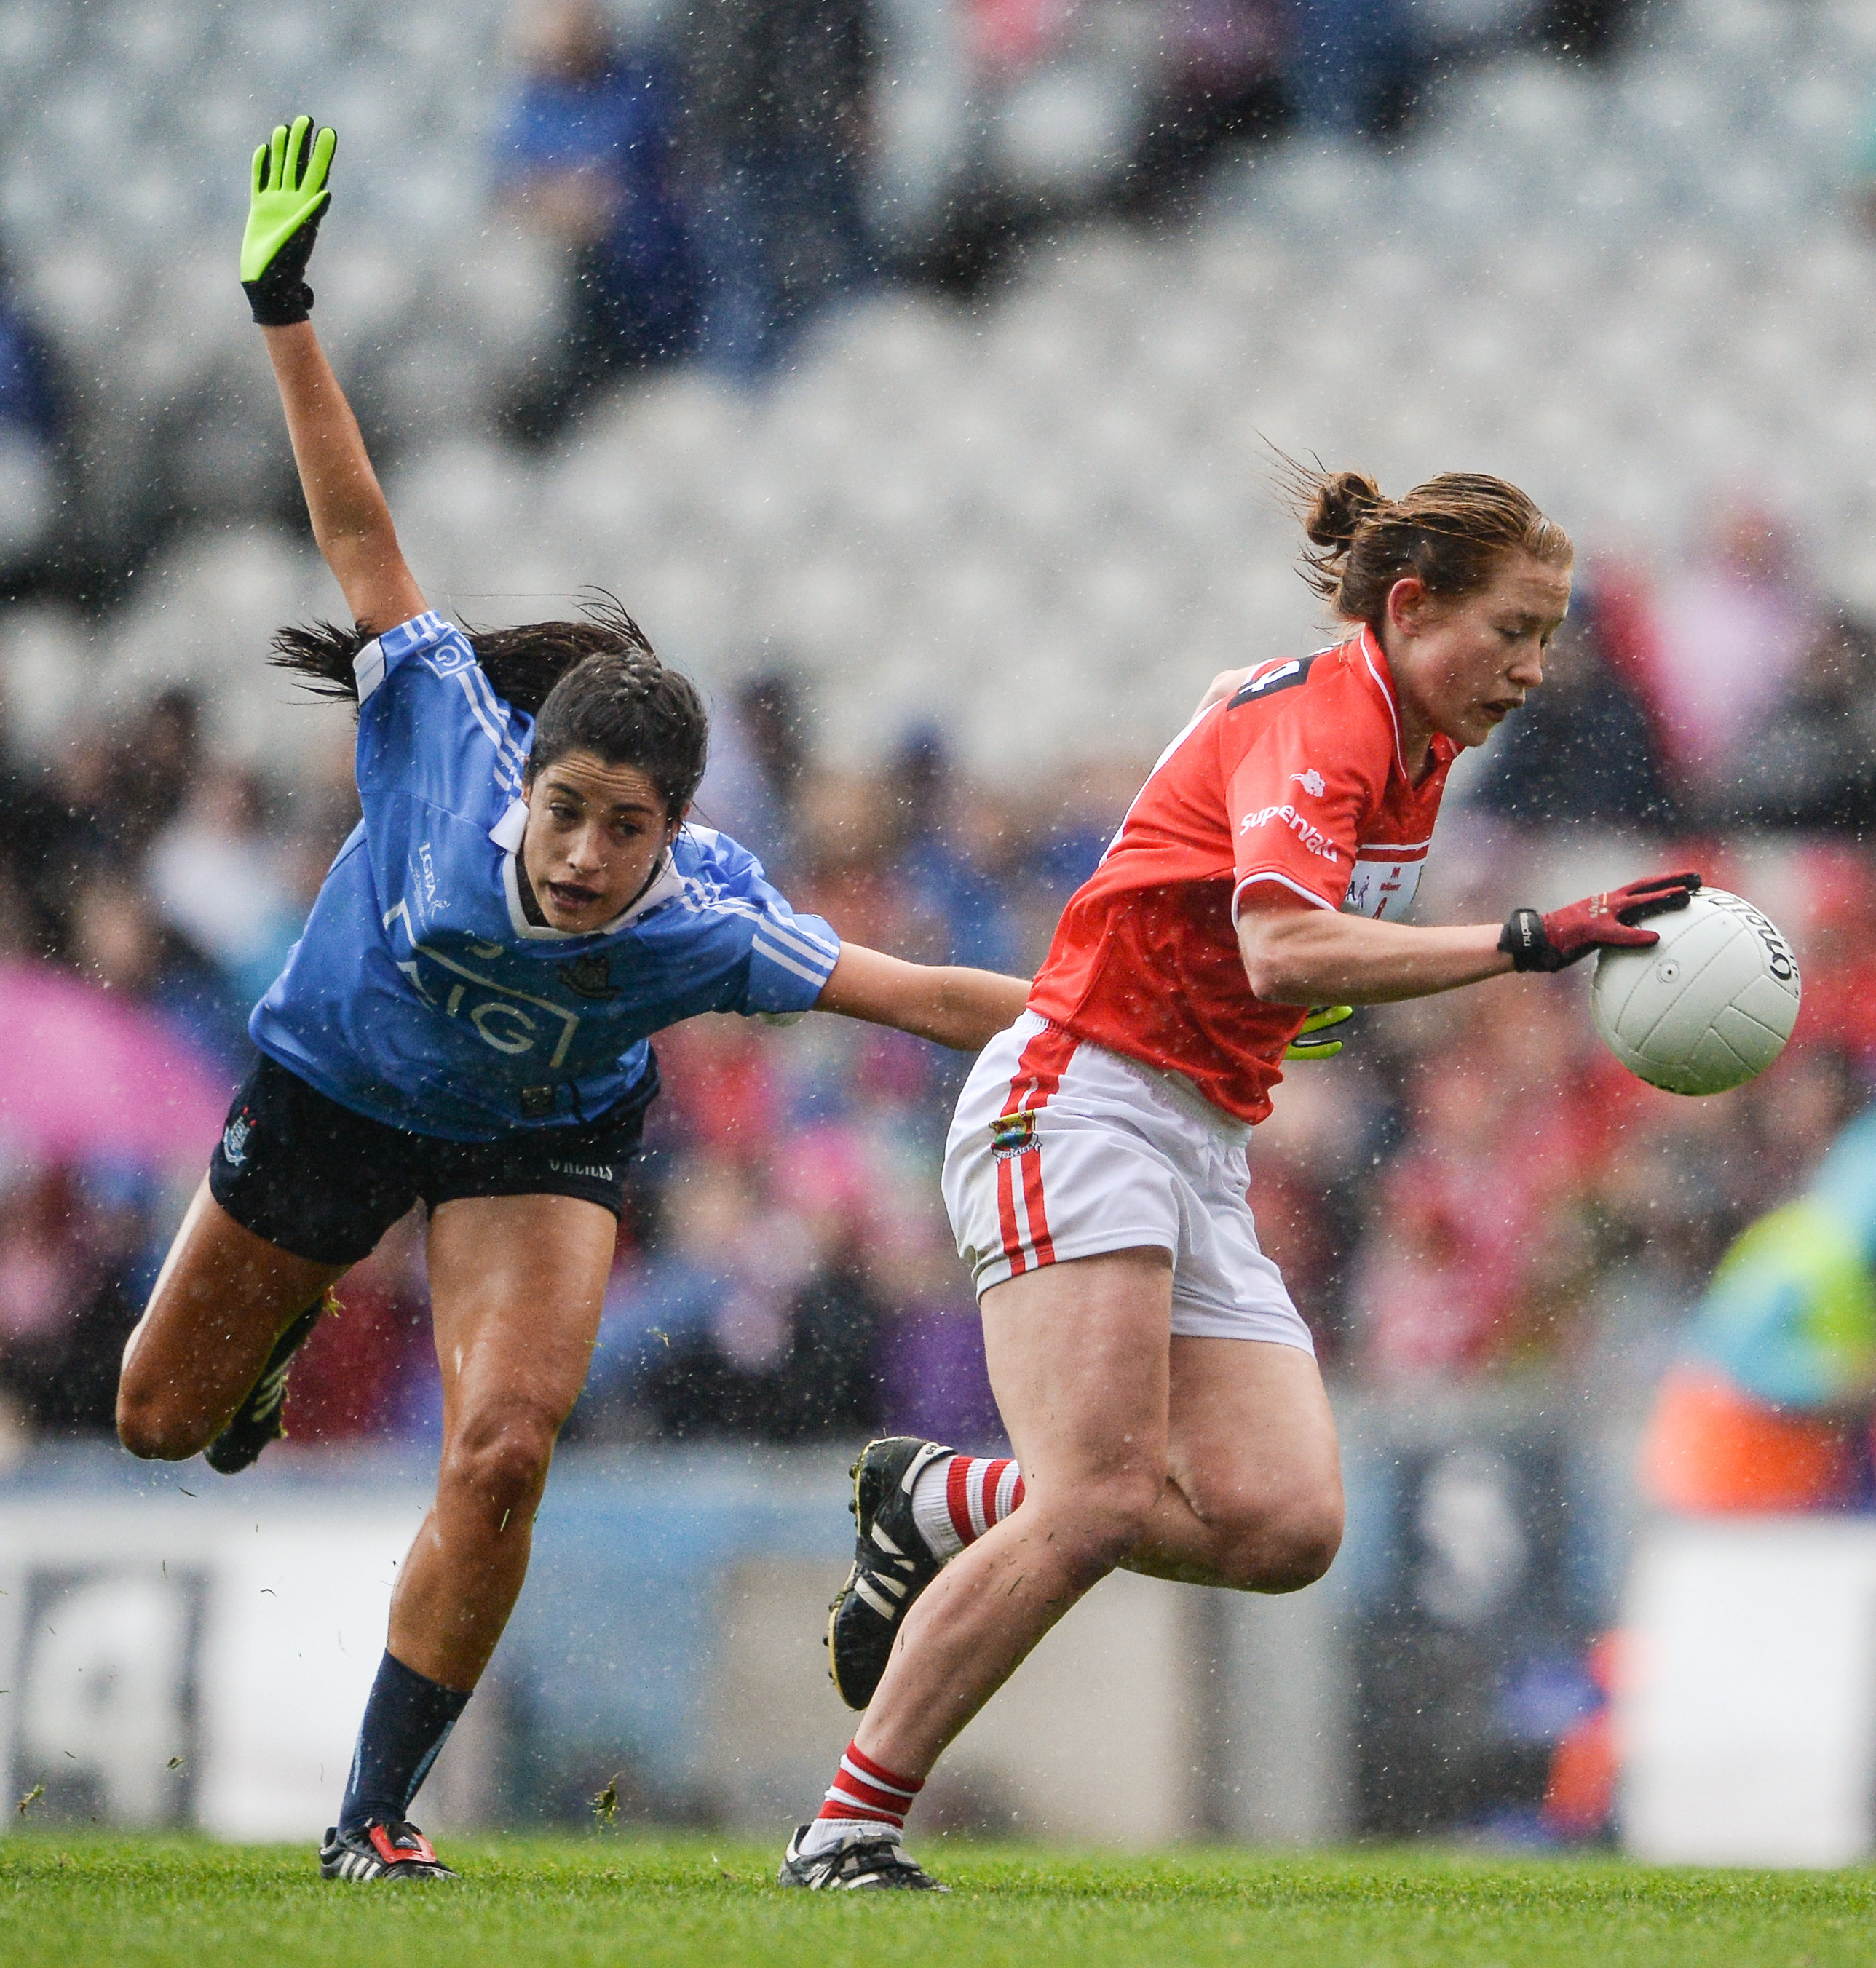 25 September 2016; Rena Buckley of Cork in action against Molly Lamb of Dublin during the Ladies Football All-Ireland Senior Football Championship Final match between Cork and Dublin at Croke Park in Dublin.  Photo by Seb Daly/Sportsfile *** NO REPRODUCTION FEE ***